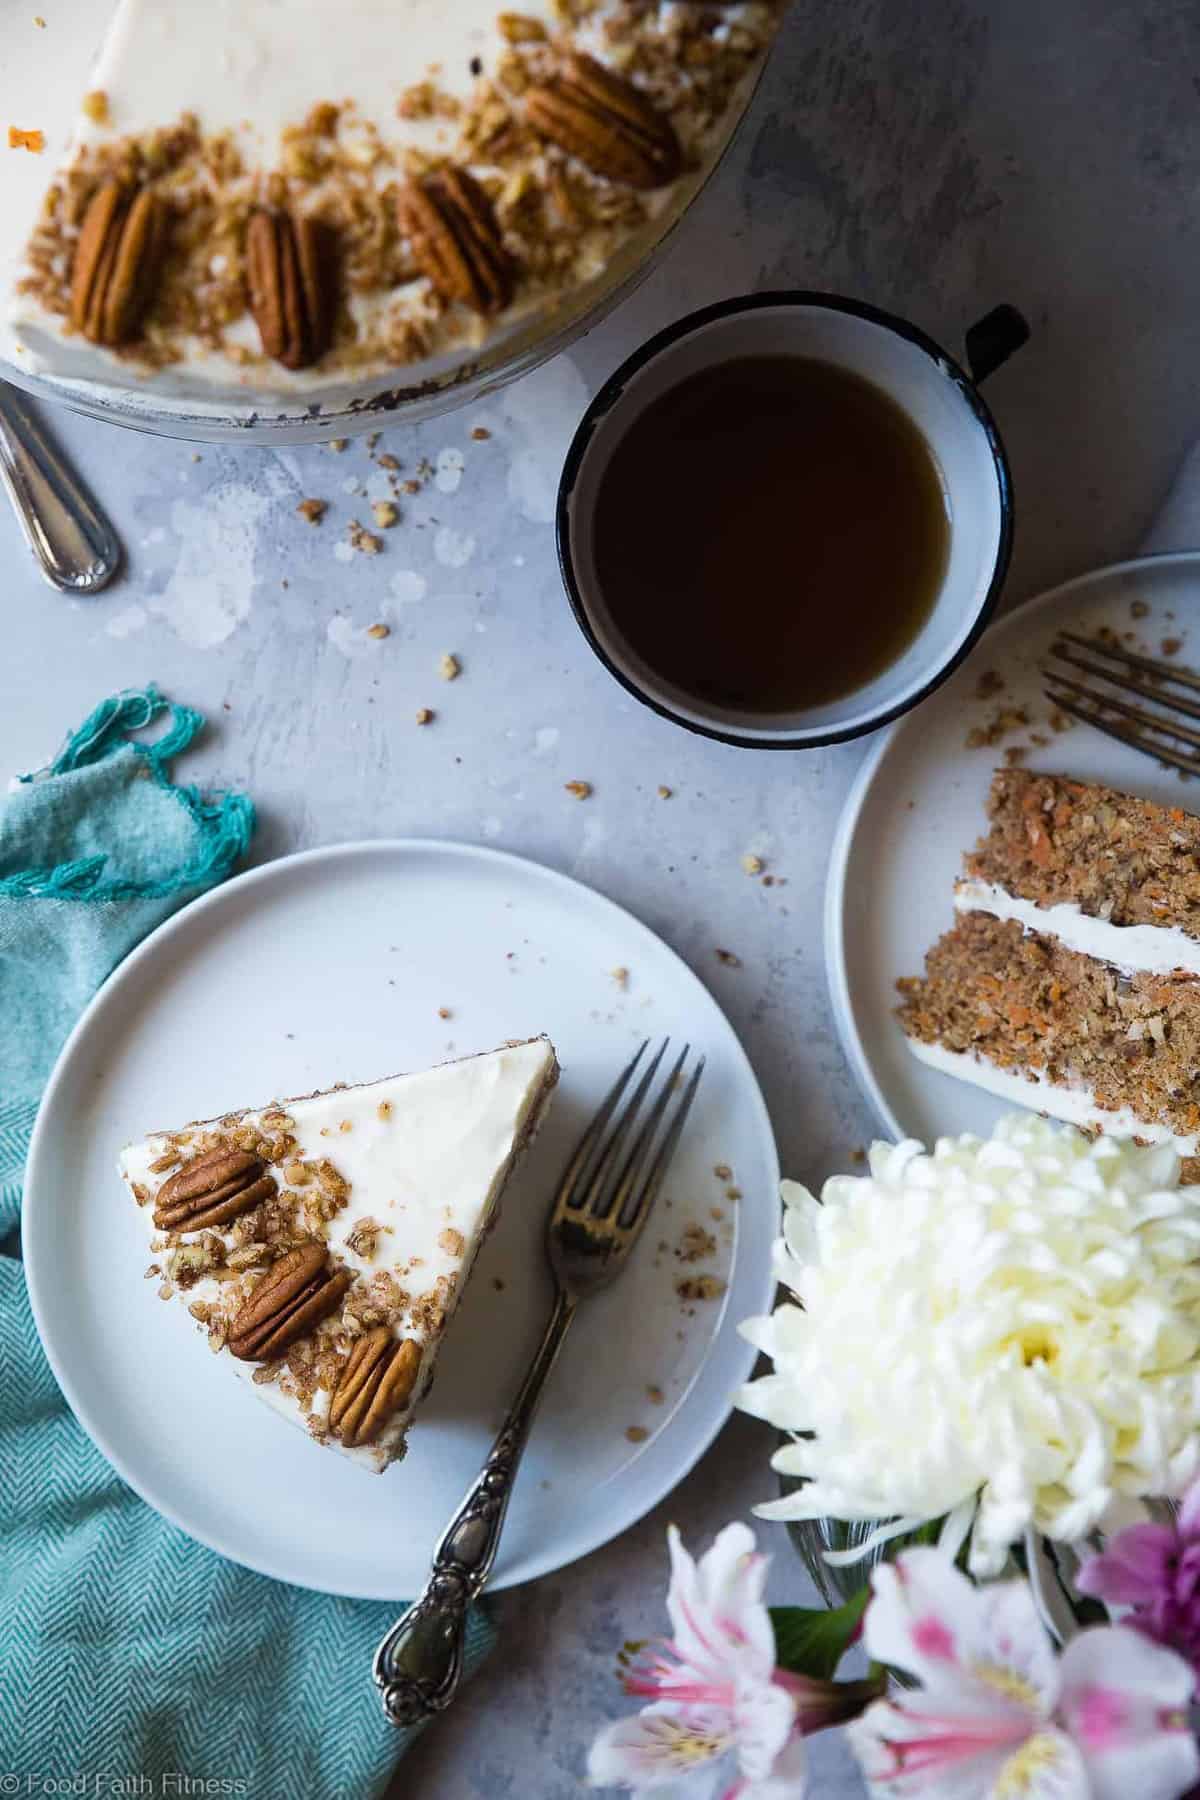 Healthy Gluten Free Sugar Free Carrot Cake - this healthy, sugar free carrot cake is SO moist and tender, you'll never know it's gluten, oil and butter free, made with Greek yogurt, only 170 calories and 5 WW Freestyle points! Perfect for Easter! | #Foodfaithfitness | #Lowcarb #sugarfree #glutenfree #carrotcake #easter